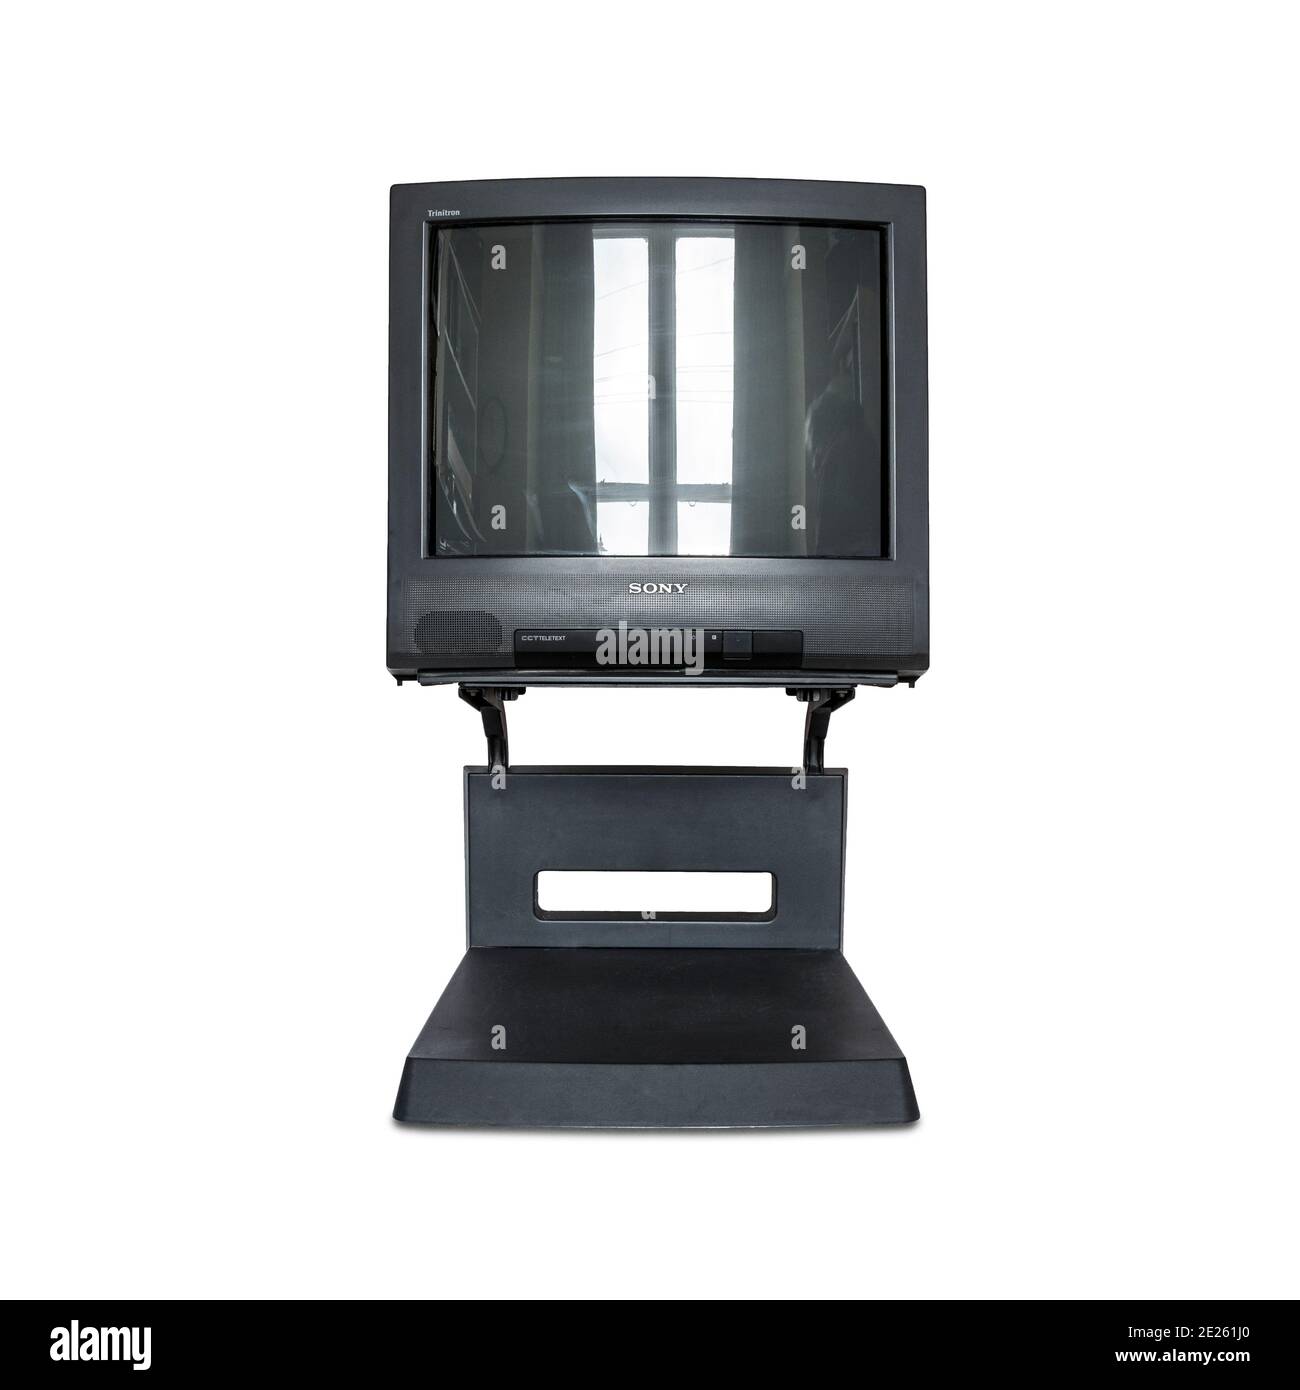 A 1996 black Sony Trinitron CRT television set on its stand, isolated against a white background Stock Photo